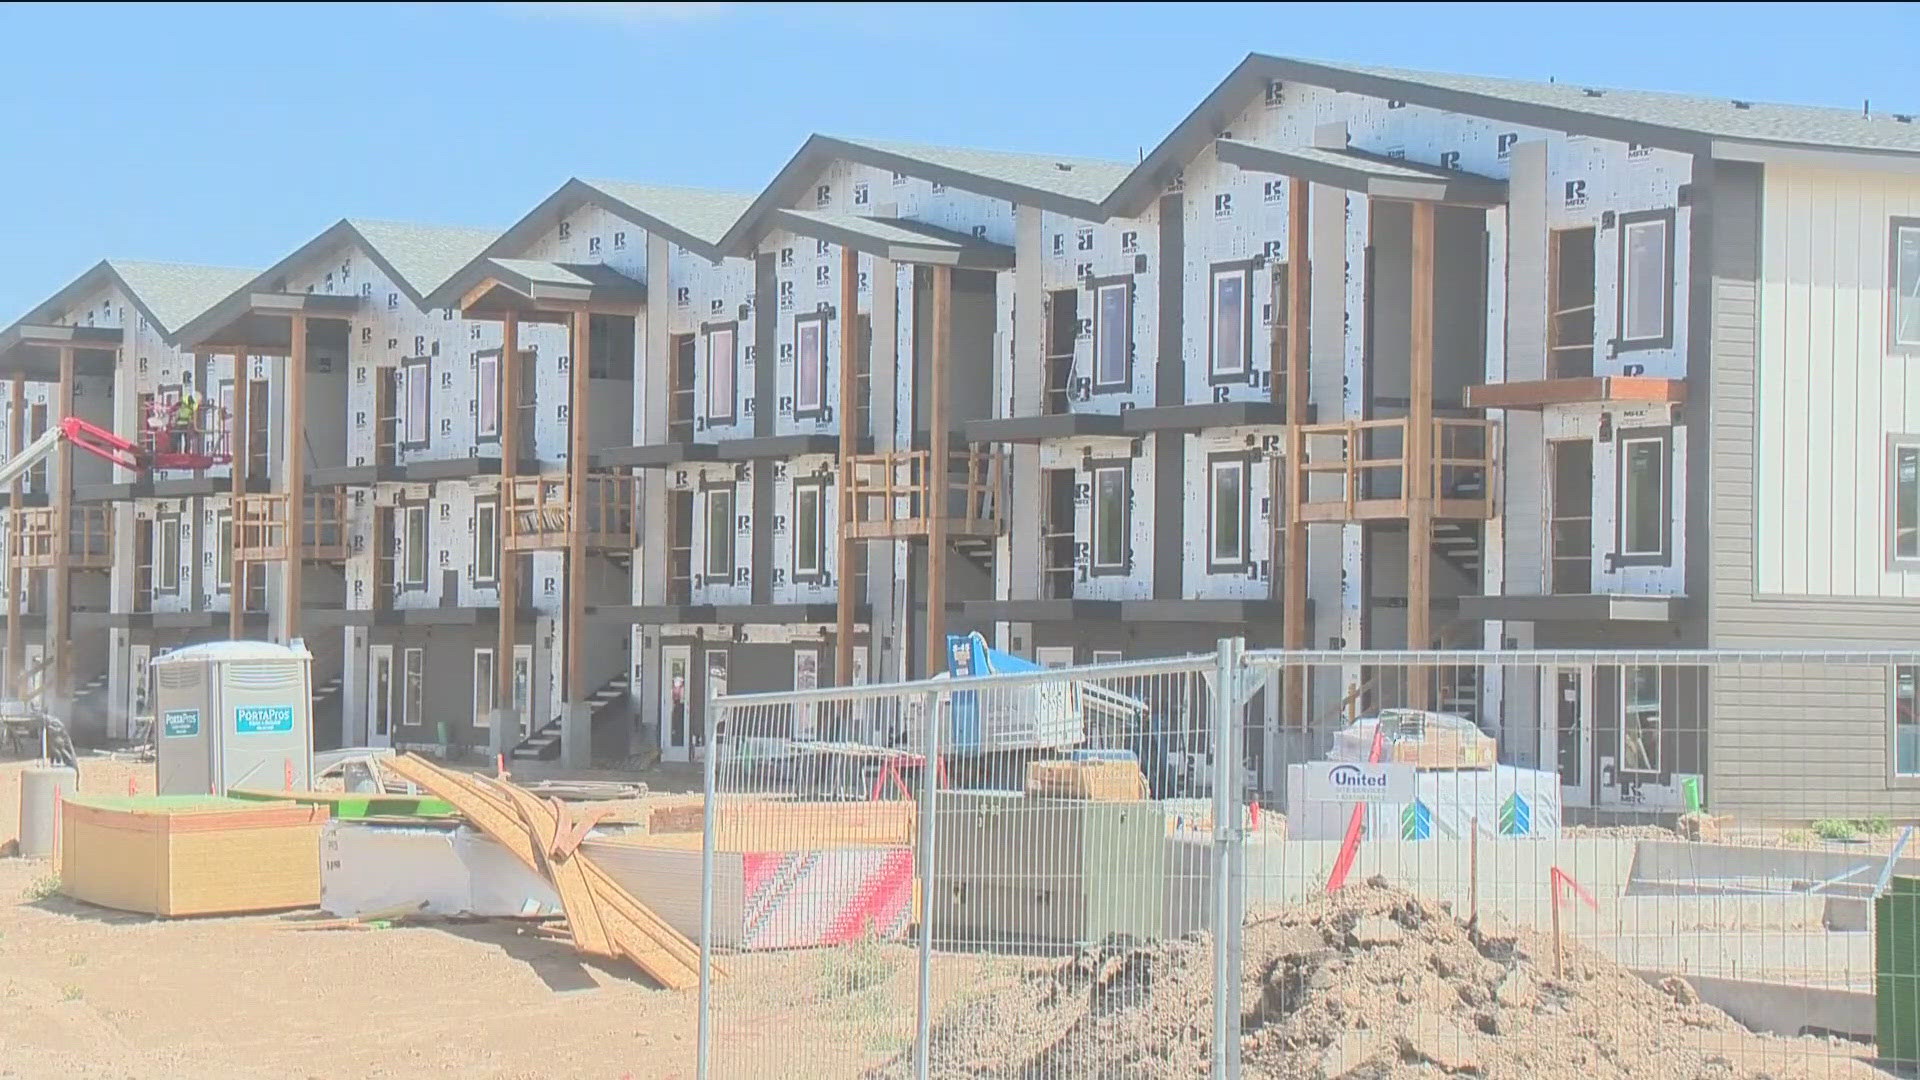 LEAP Housing built the 60-unit community called Falcons Landing. Residents are expected to move into the Mountain Home apartments in August.